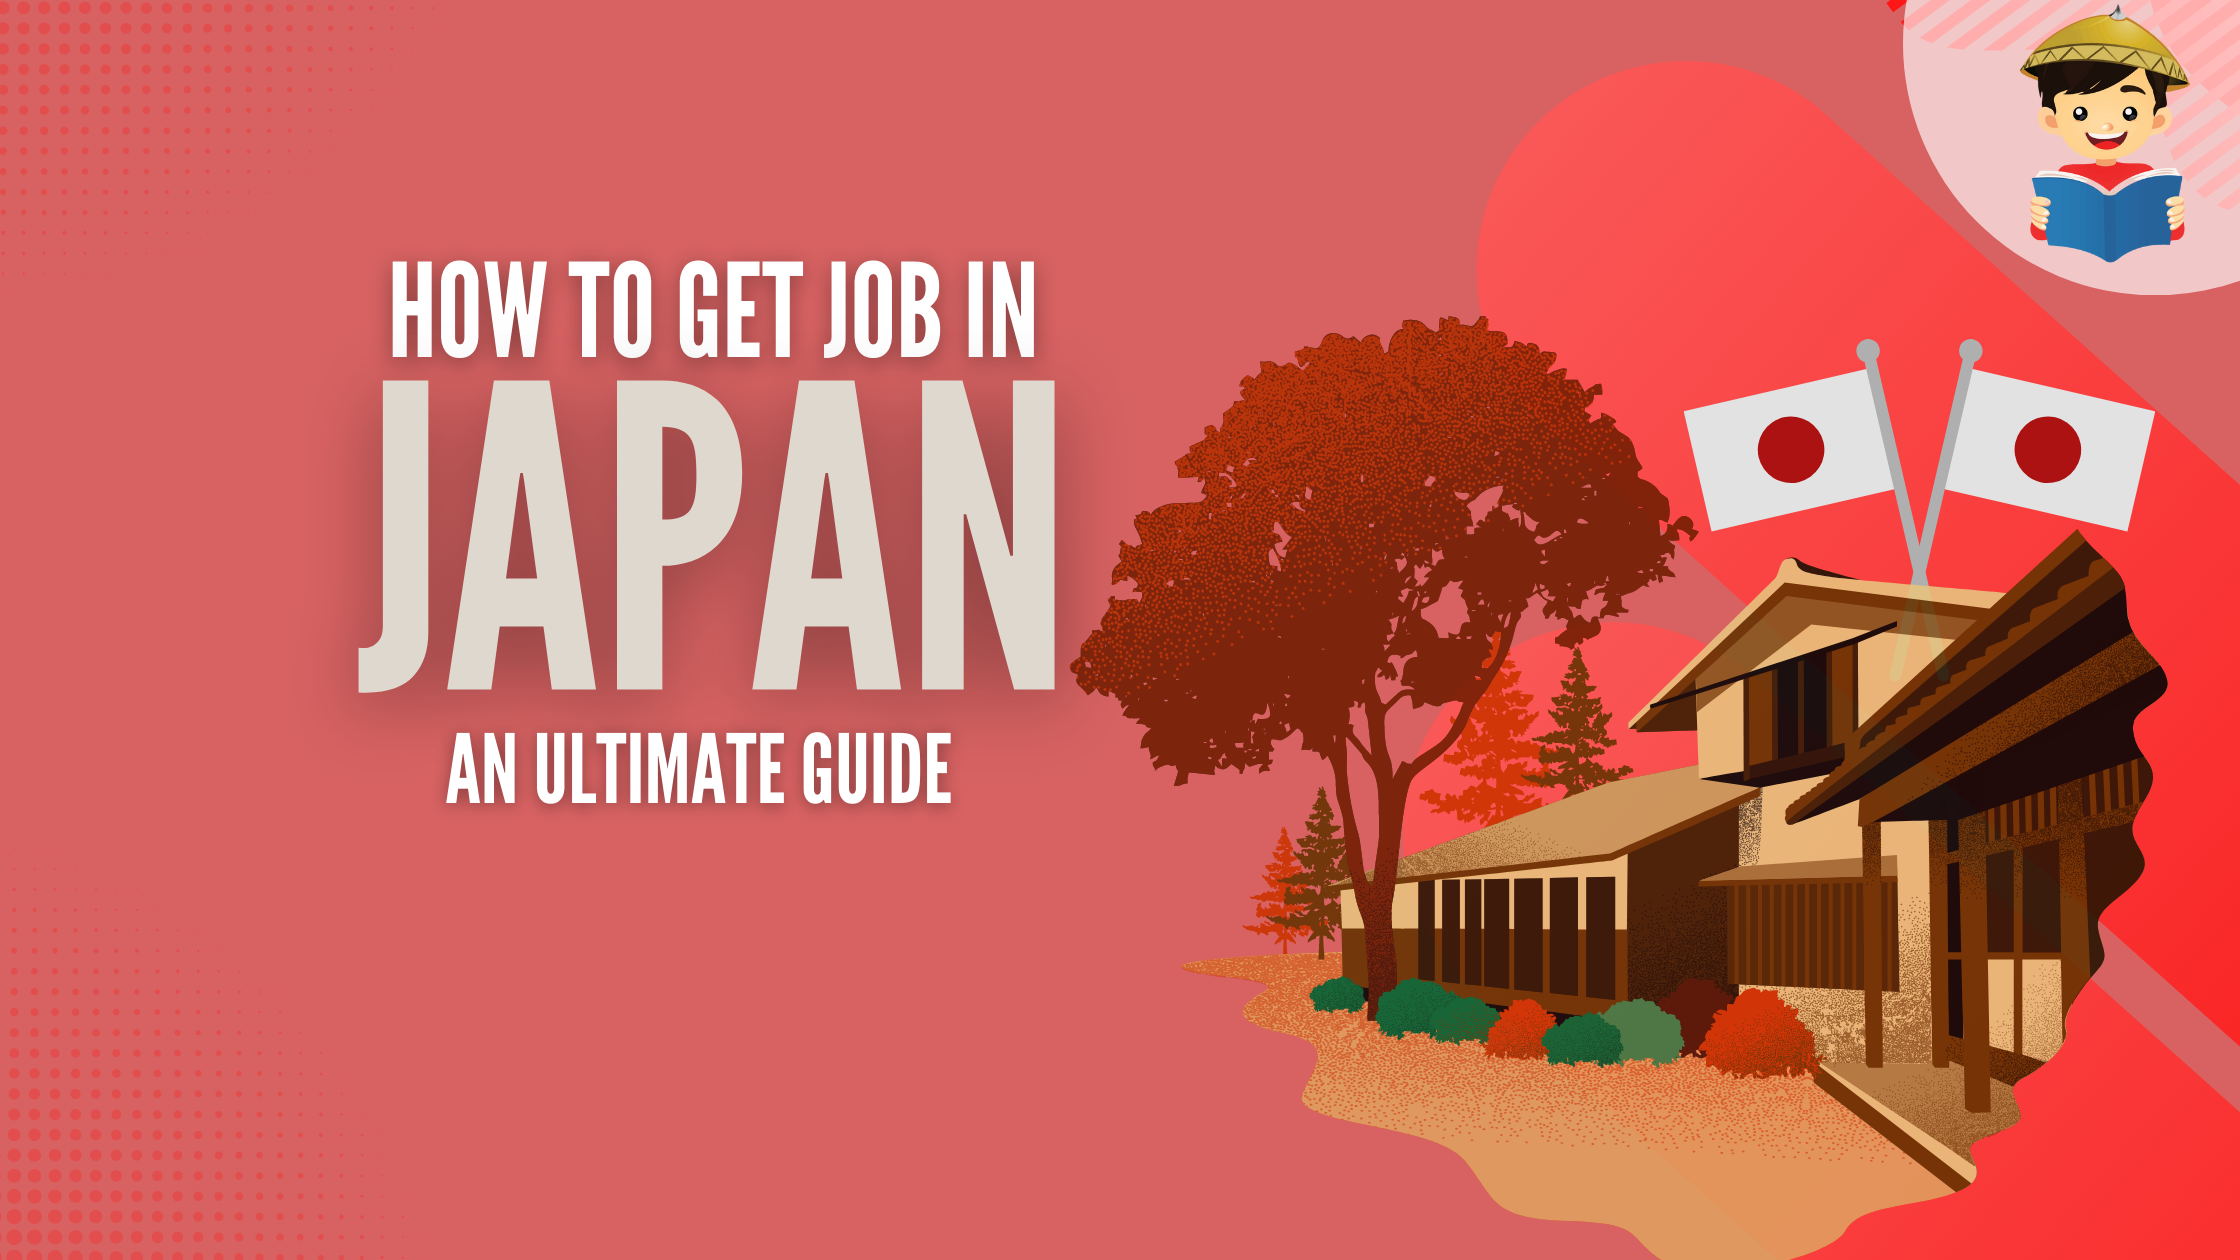 Japan-Jobs-featured-image